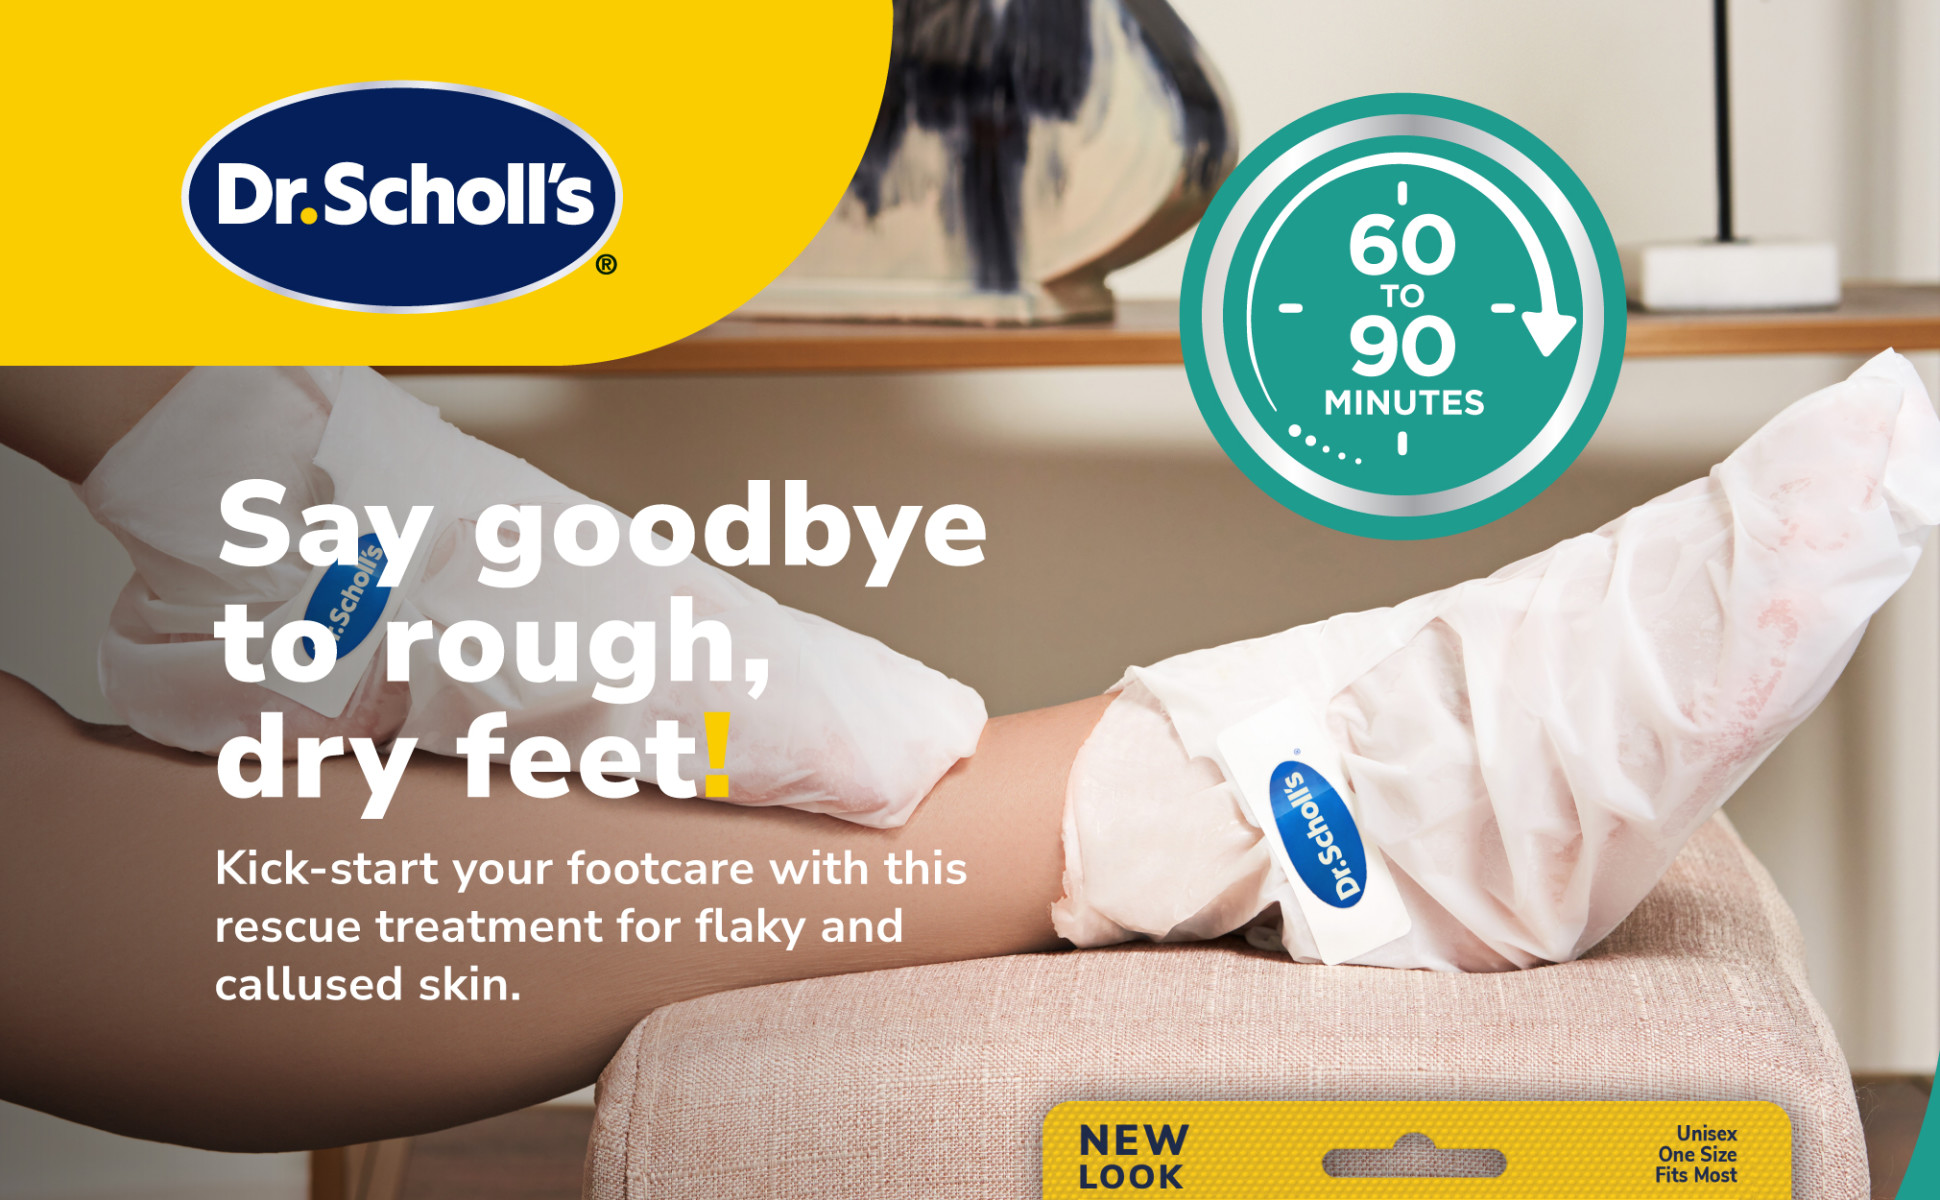 Dr. Scholl's Dry, Flaky Skin Remover Ultra Exfoliating Foot Lotion